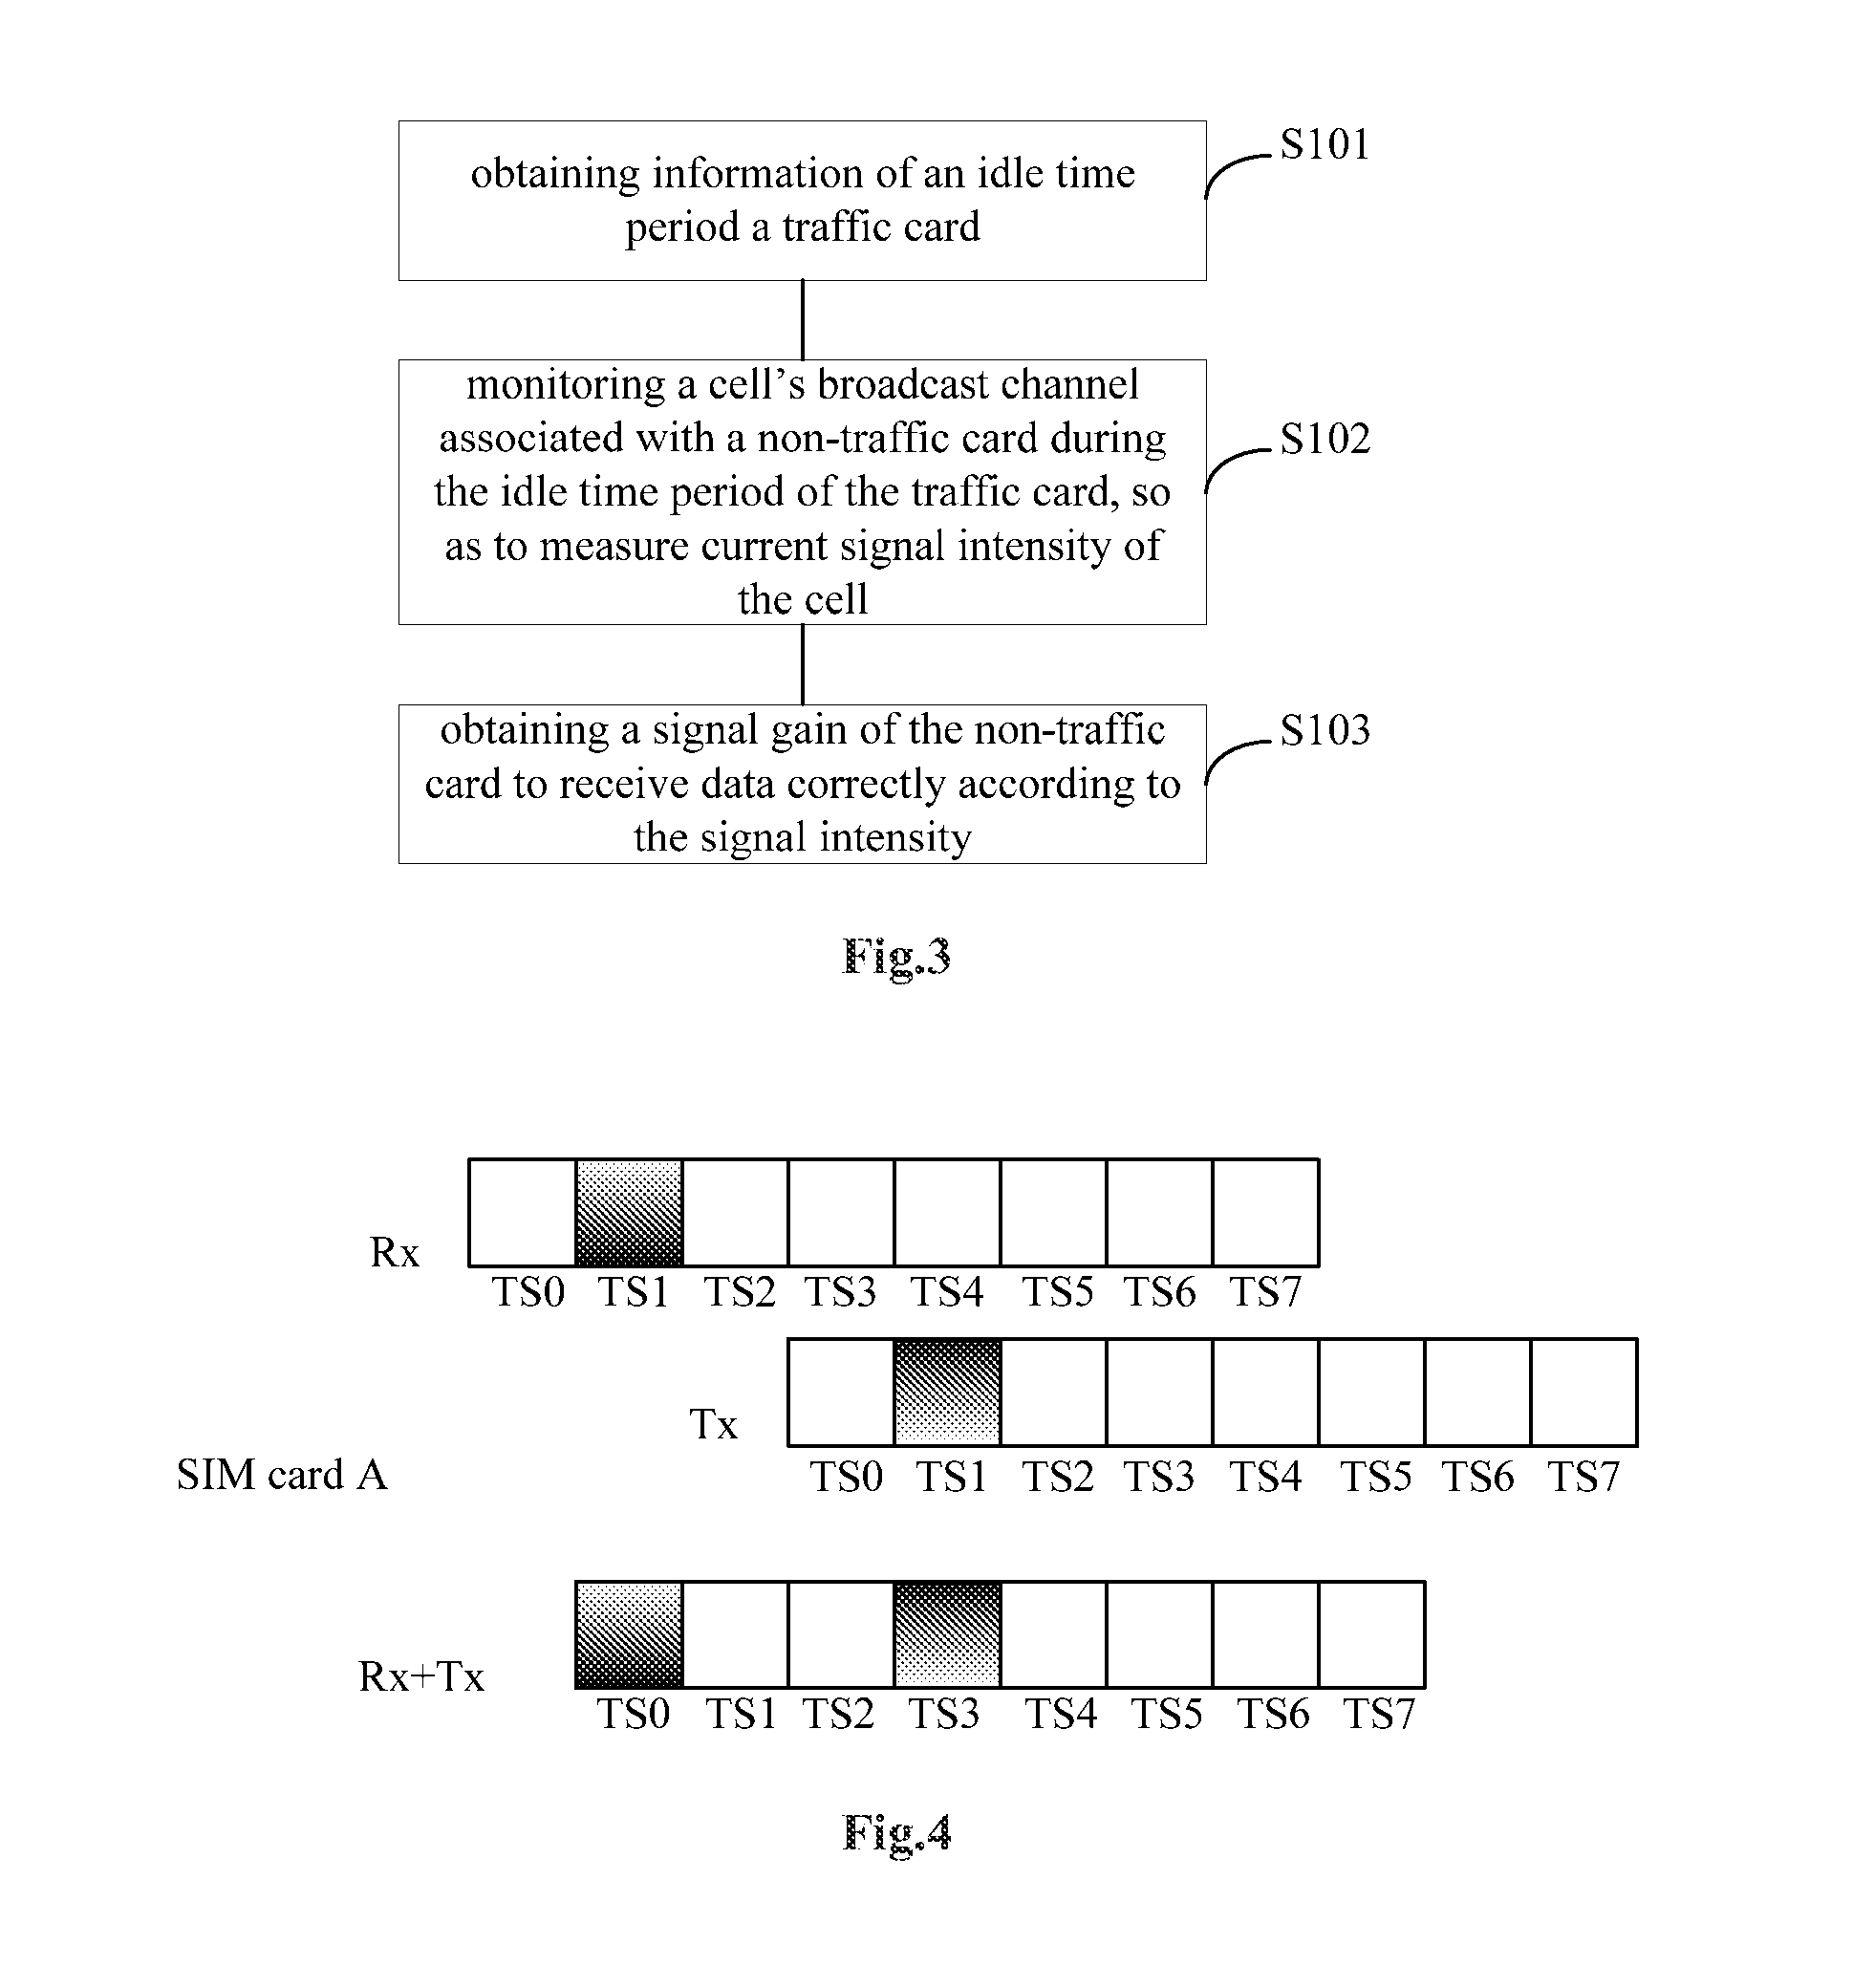 Multi-sim multi-standby communication device, and gain obtaining method for non-traffic card thereof